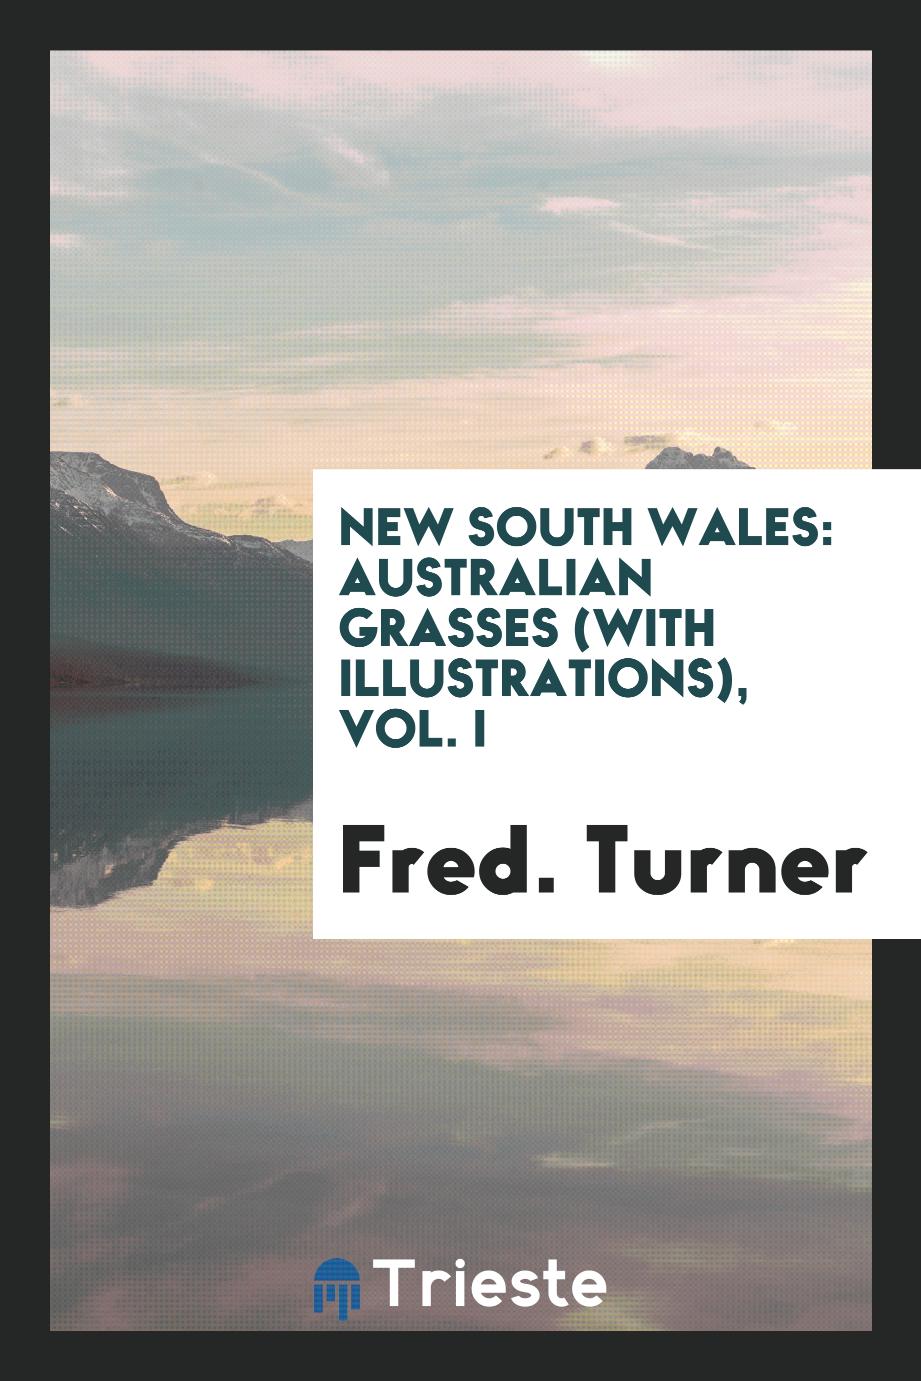 Fred. Turner - New South Wales: Australian grasses (with illustrations), Vol. I